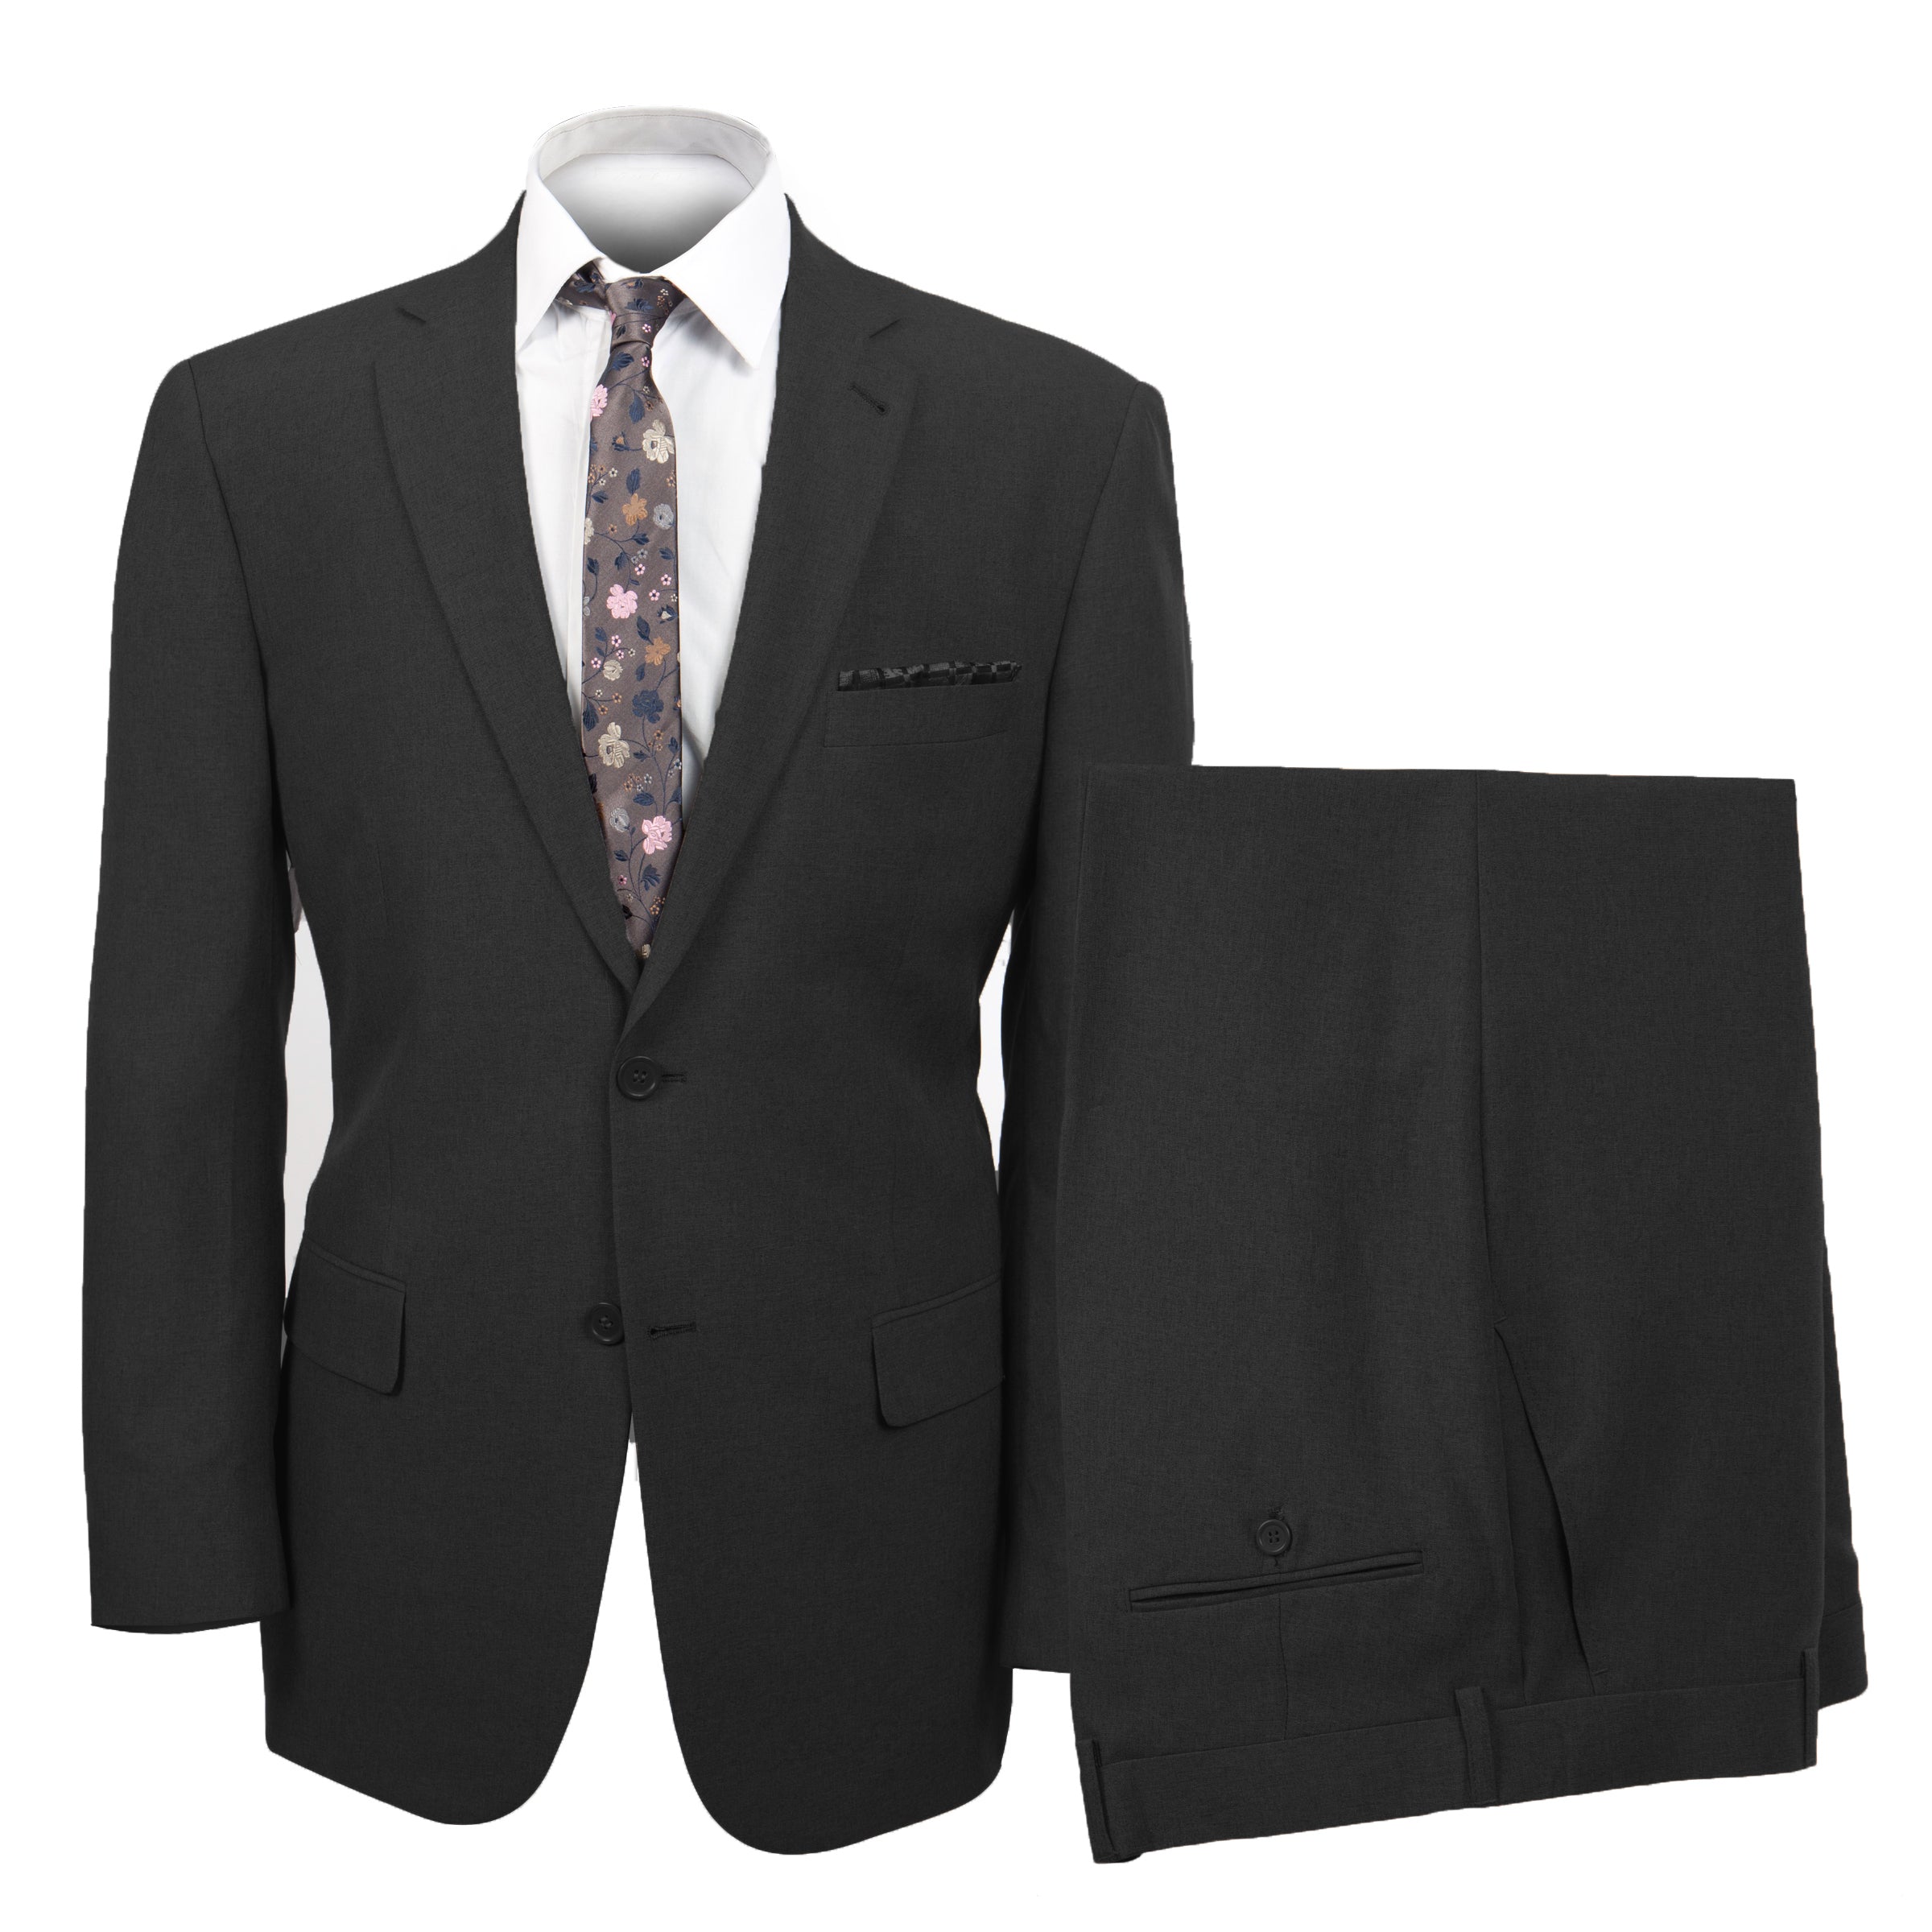 Black Suit For Men Formal Suits For All Ocassions M116-01